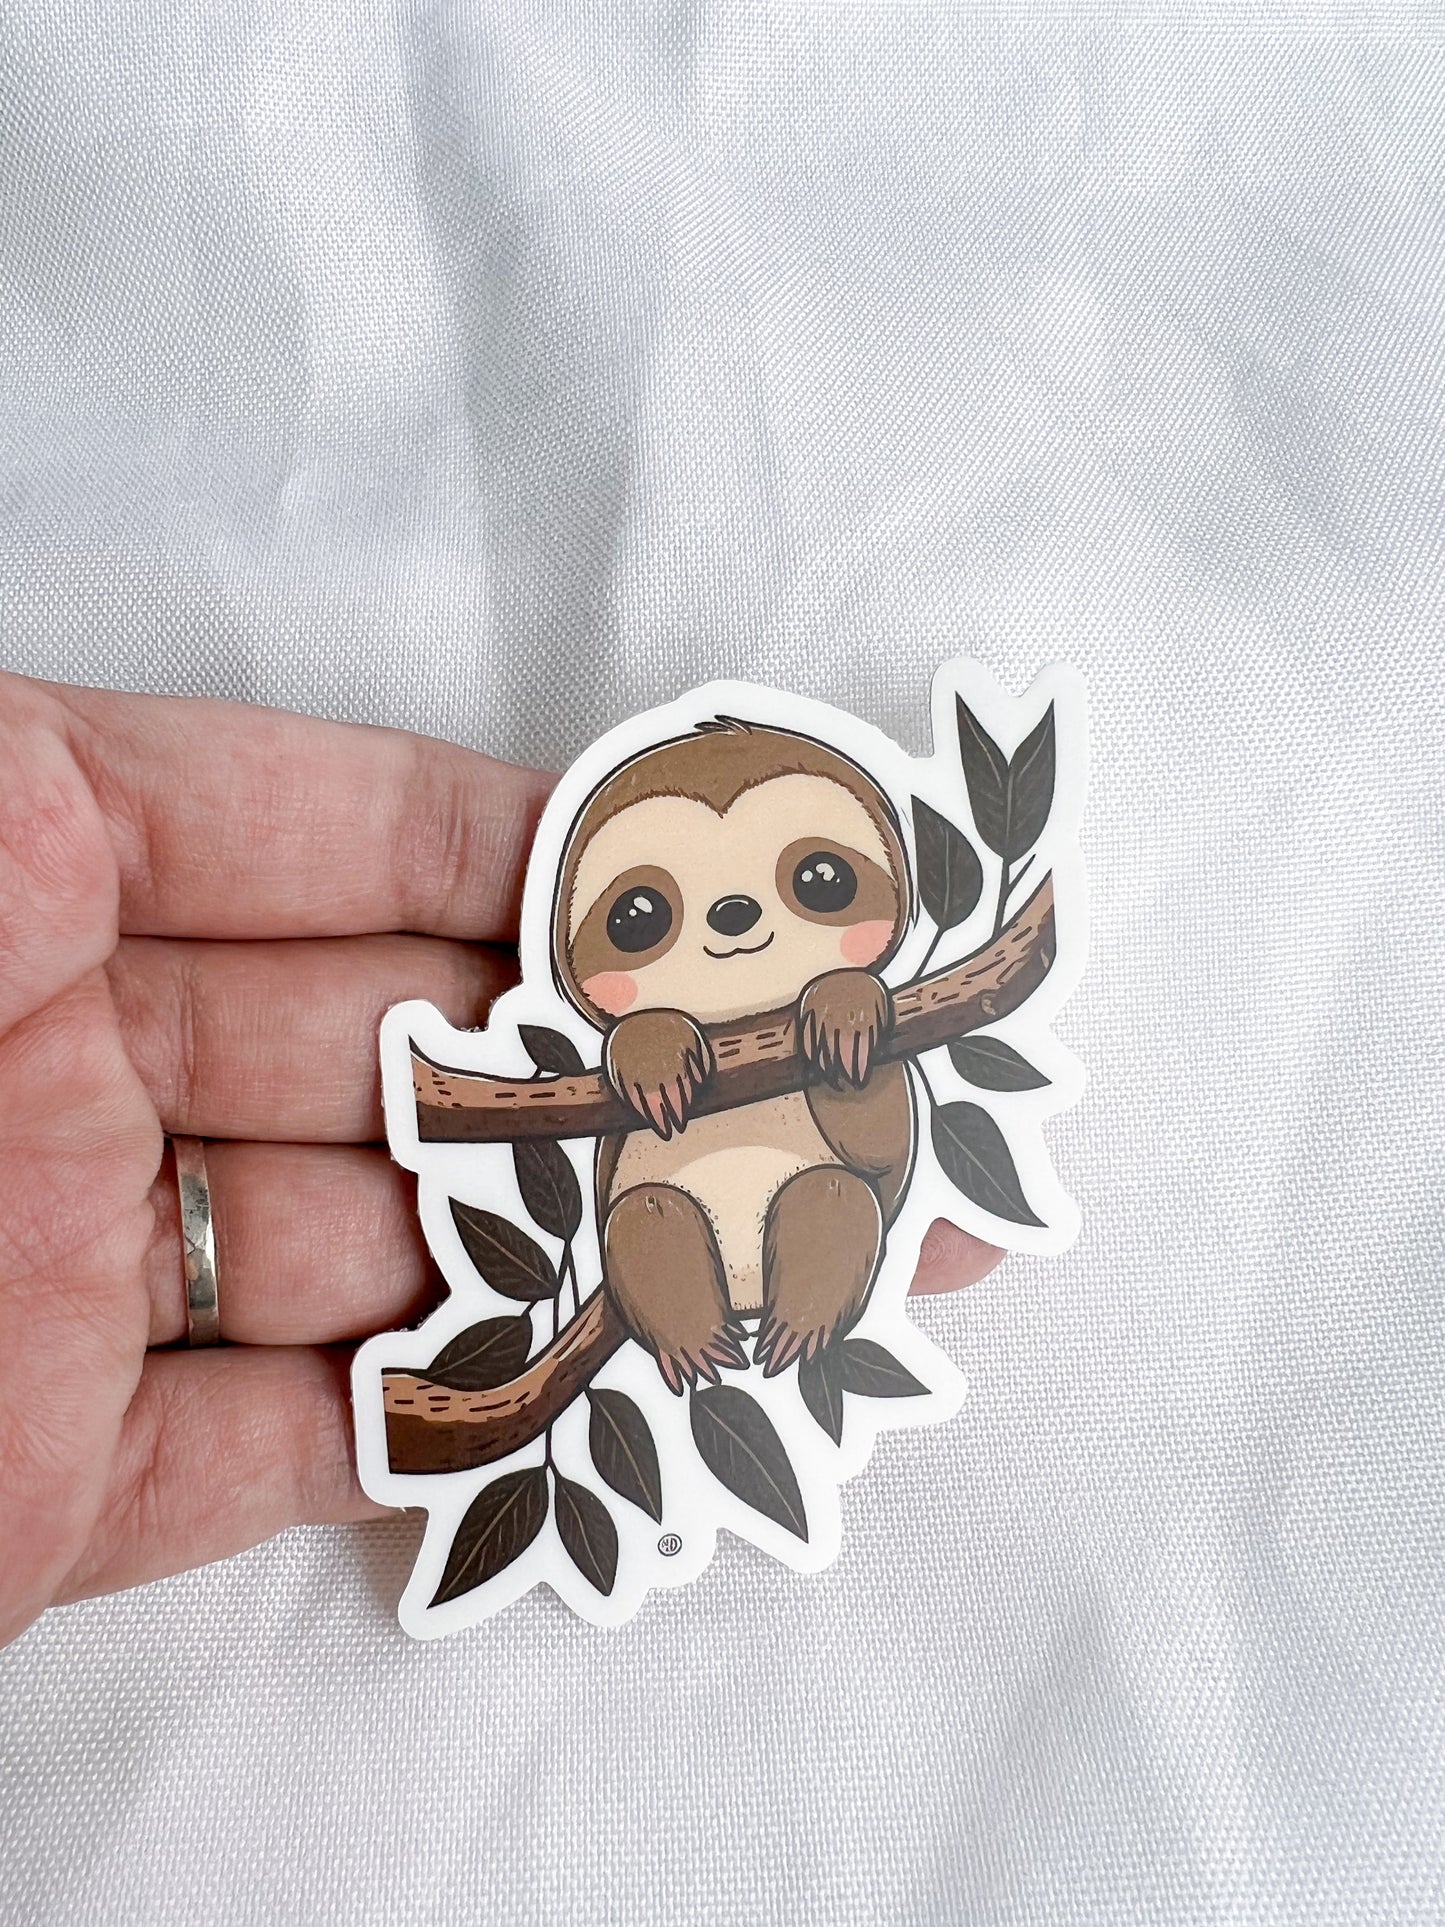 The Sloth baby sticker